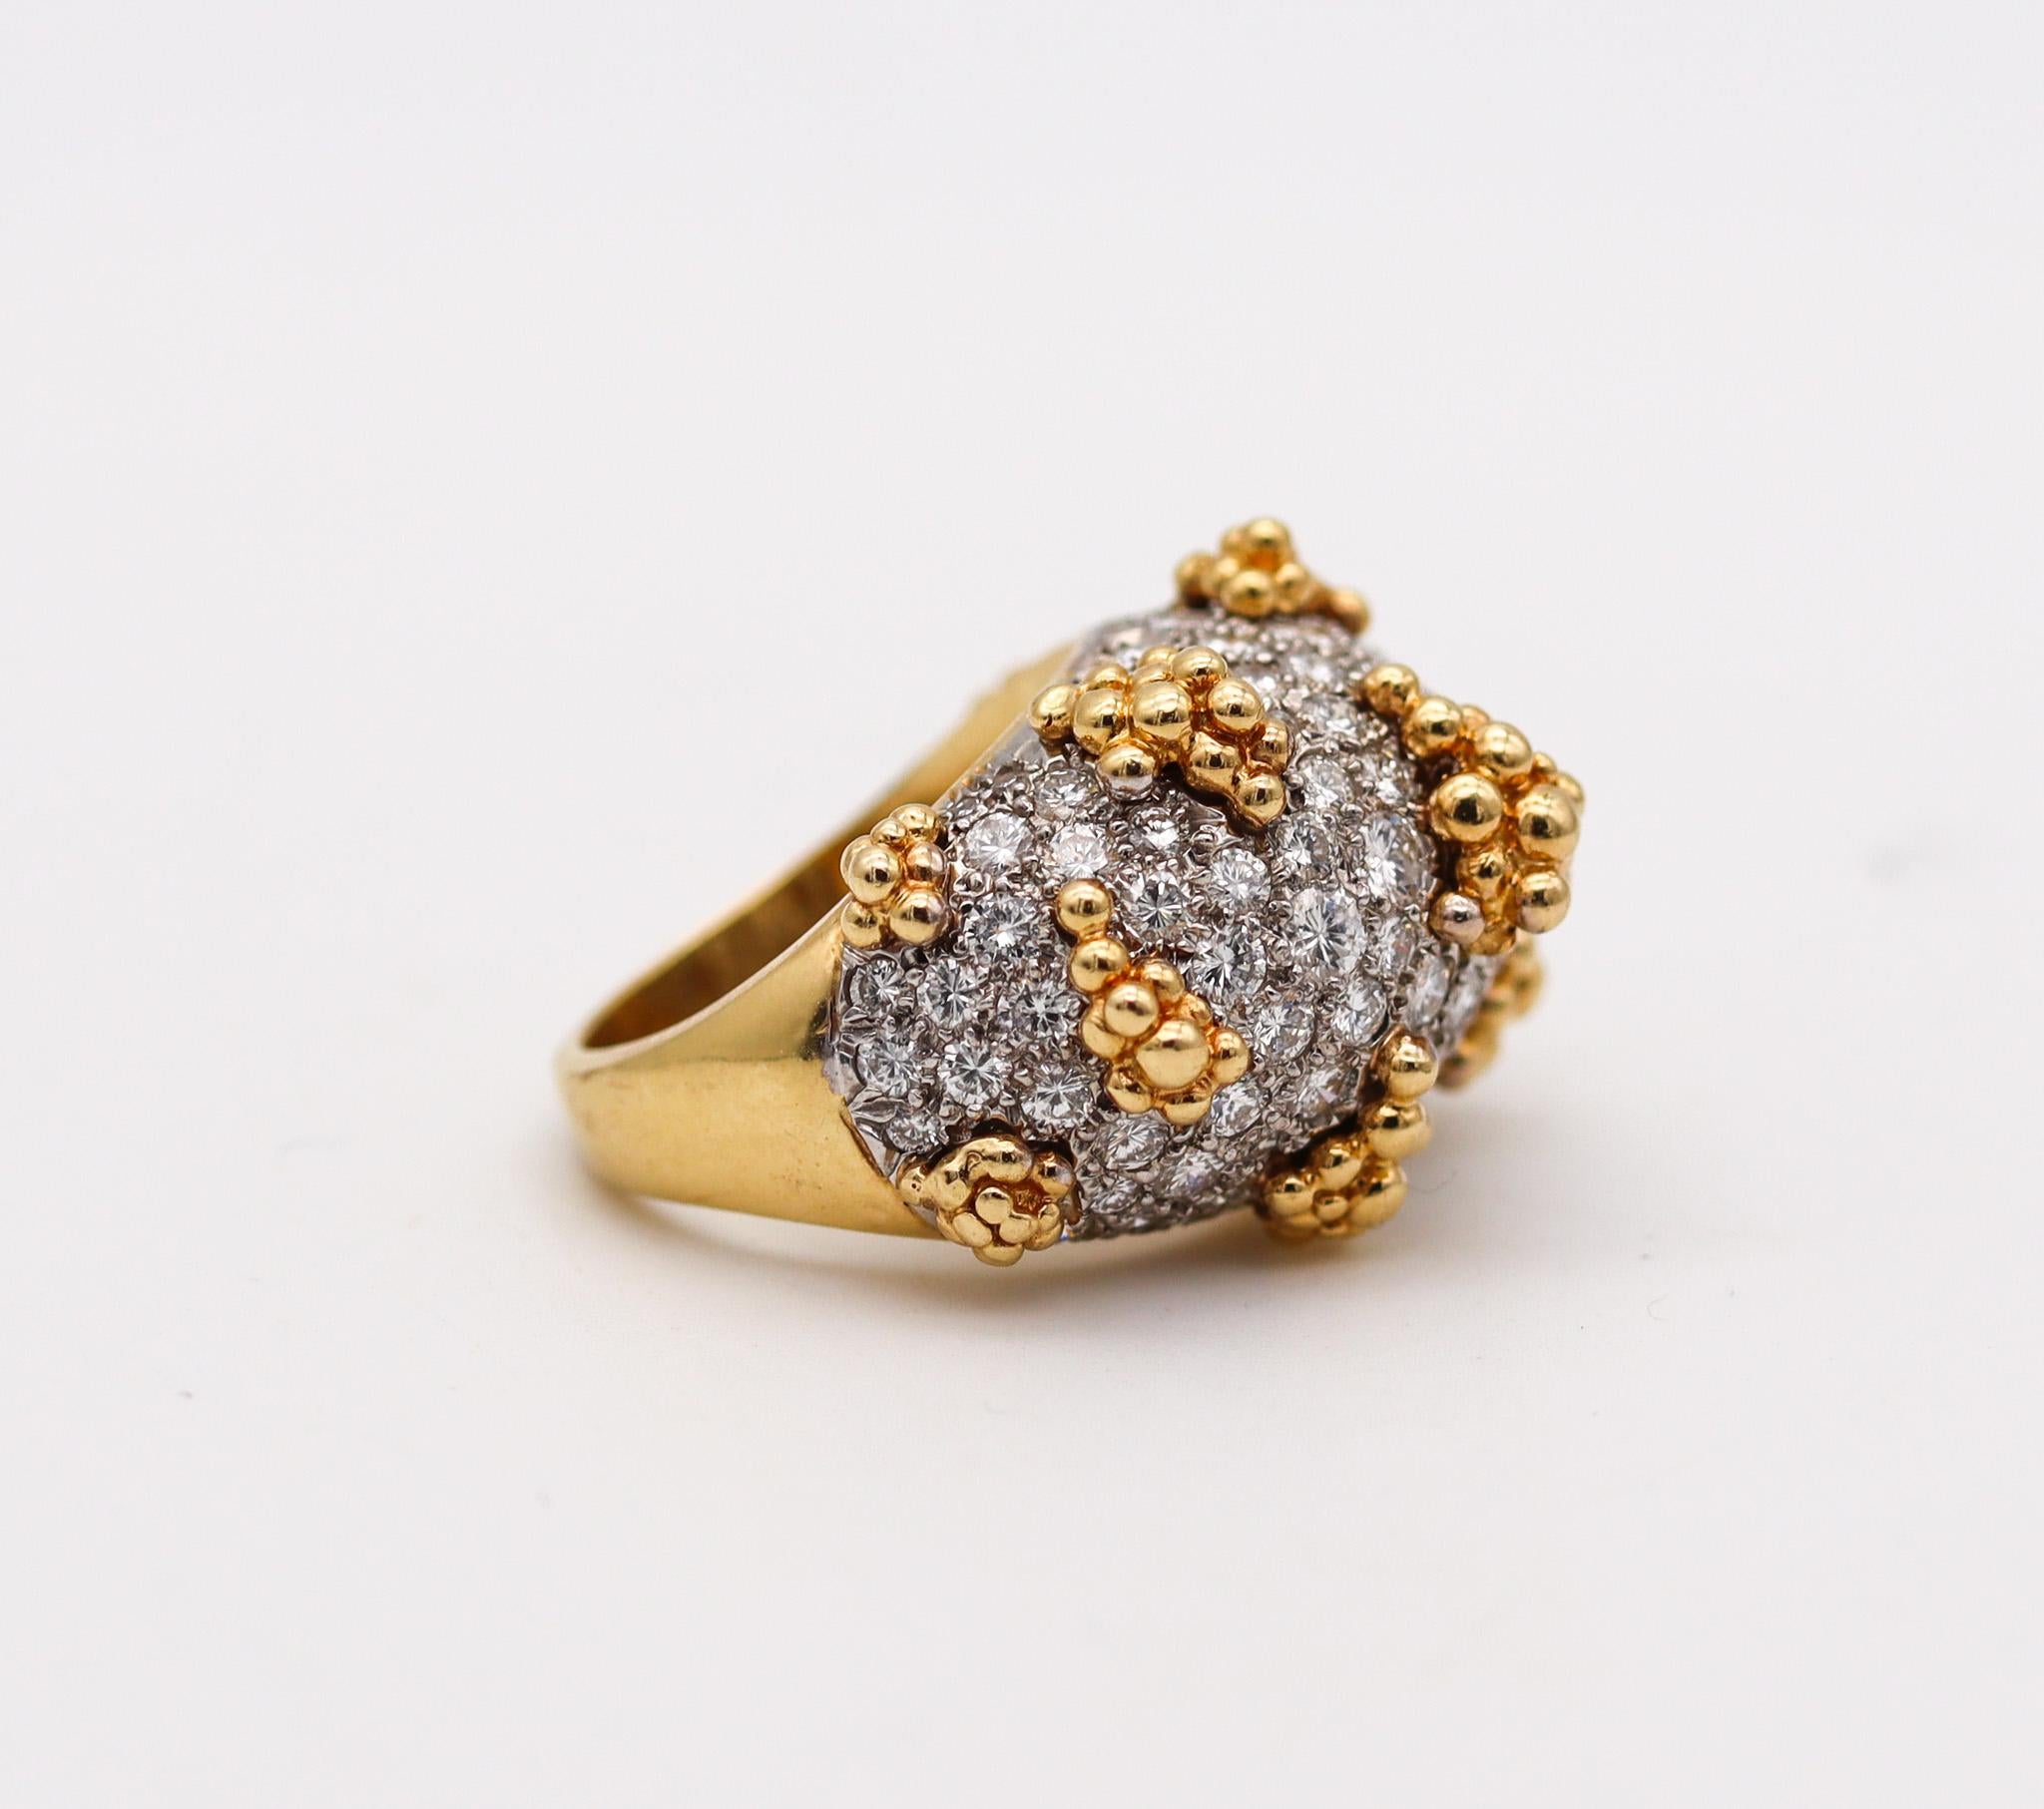 Modernist Italian Mid Century Bombe Cocktail Ring 18Kt Gold Platinum With 5.30 Ctw Diamond For Sale